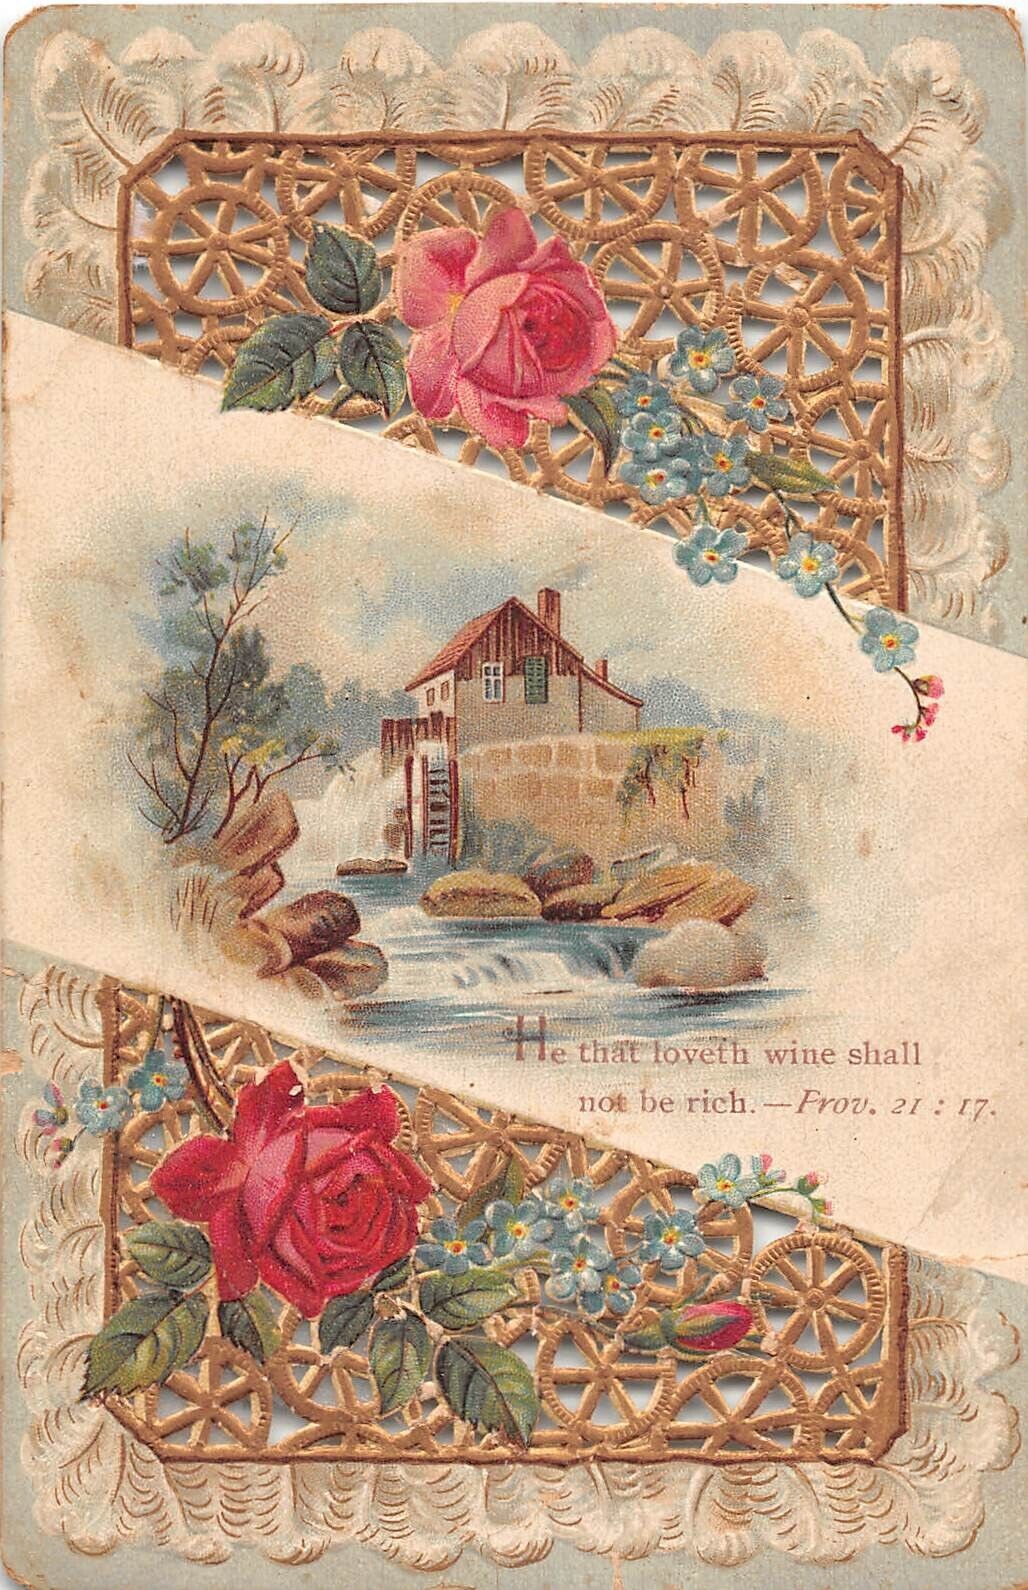 Die-Cut Old Religious Sunday School Card-Bible Verse With Mill Scene & Roses